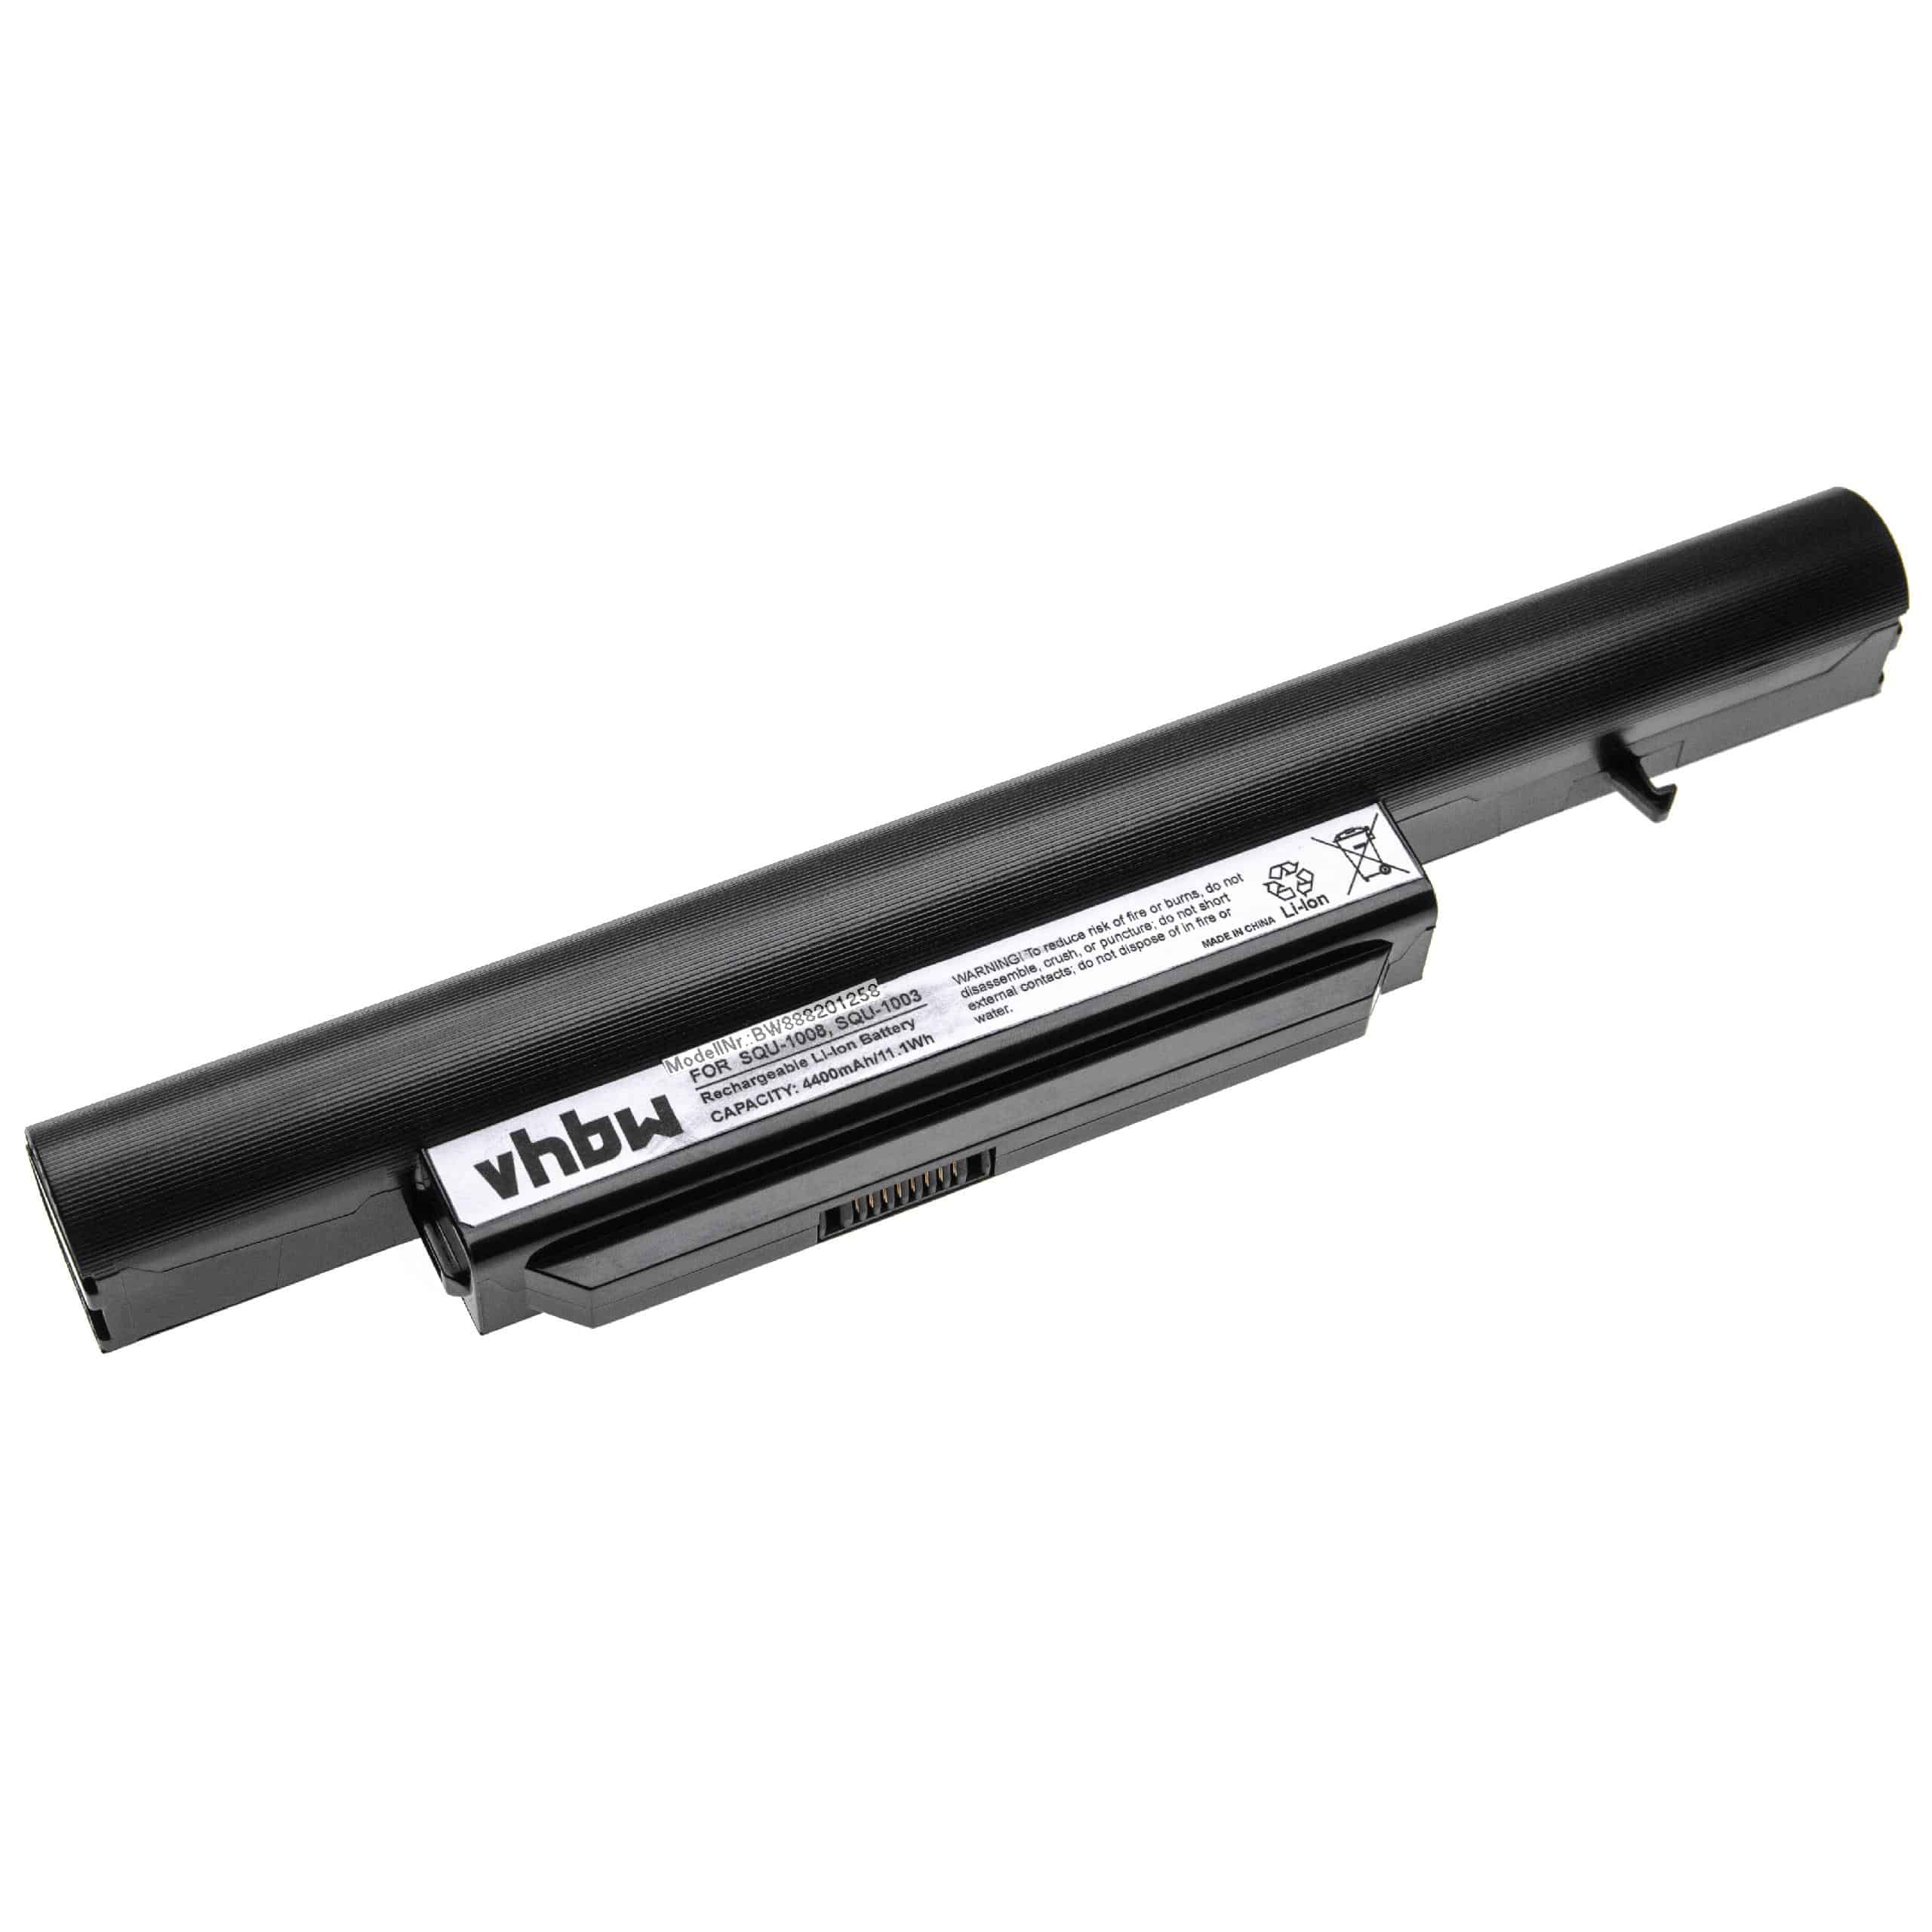 Notebook Battery Replacement for Hasee 916T2134F, 916T2132F, 3UR18650-2-T0681 - 4400mAh 11.1V Li-Ion, black